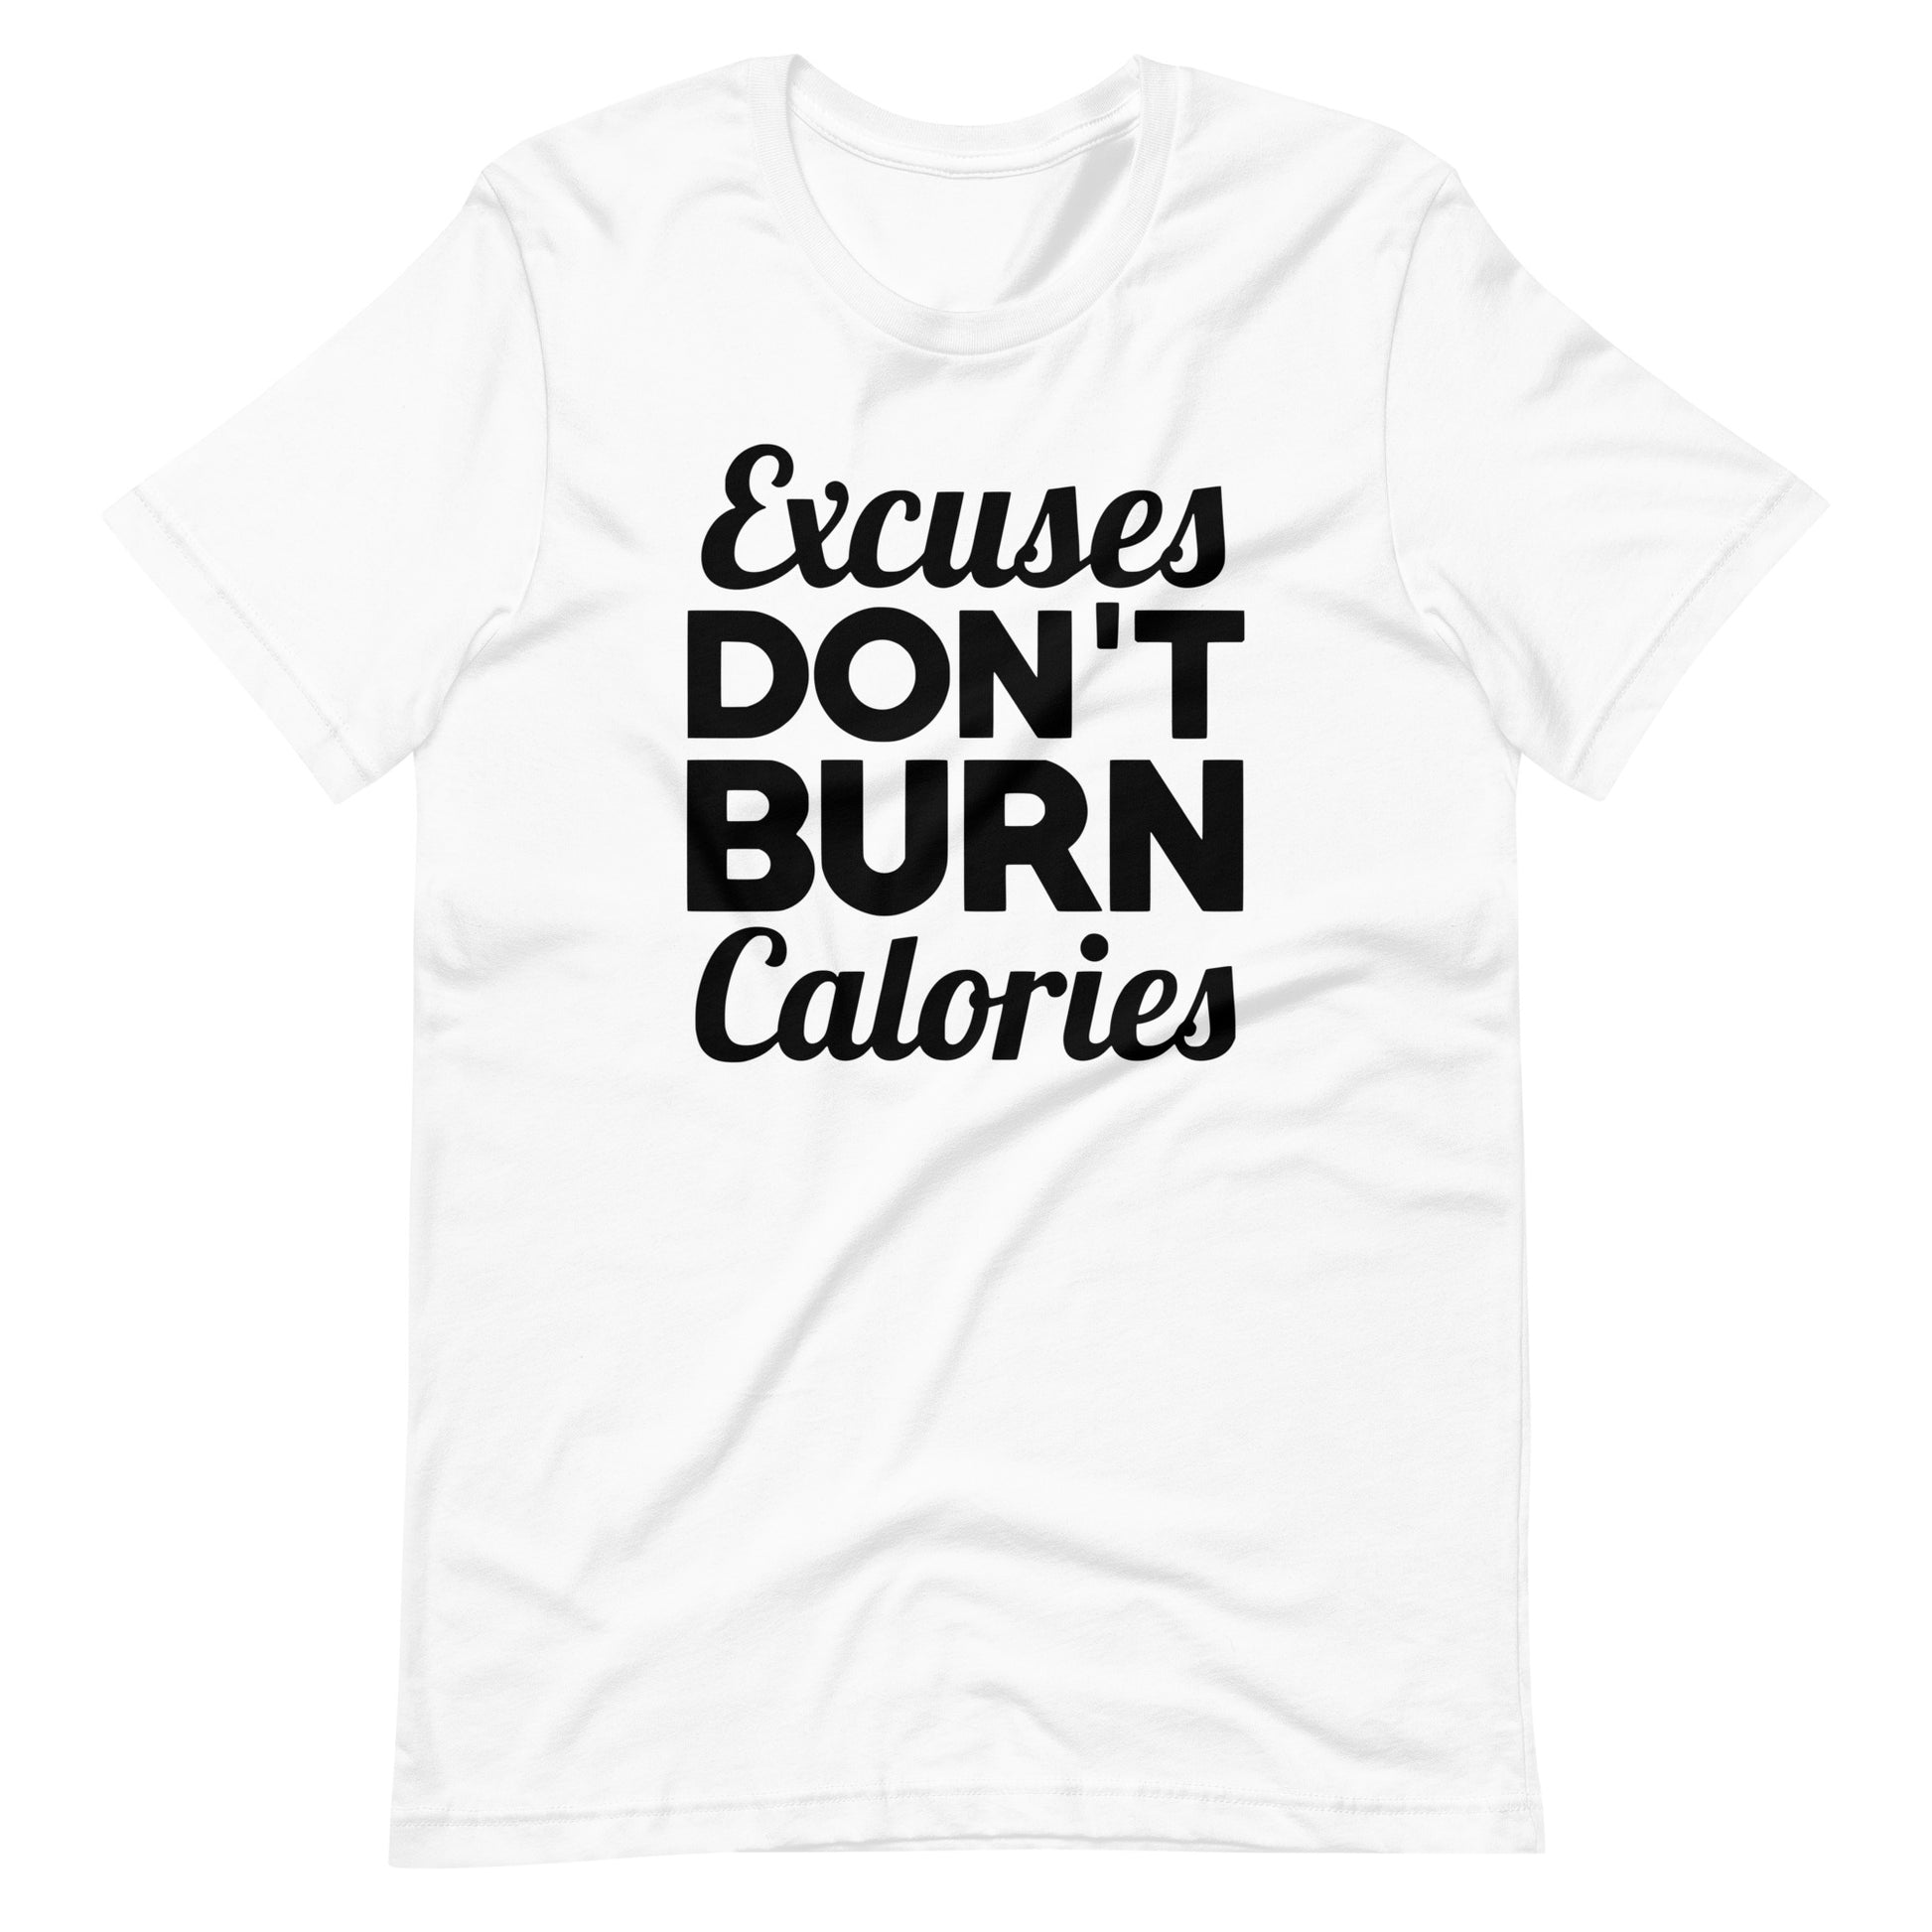 Excuses Don't Burn Calories Tee The Workout Inspiration